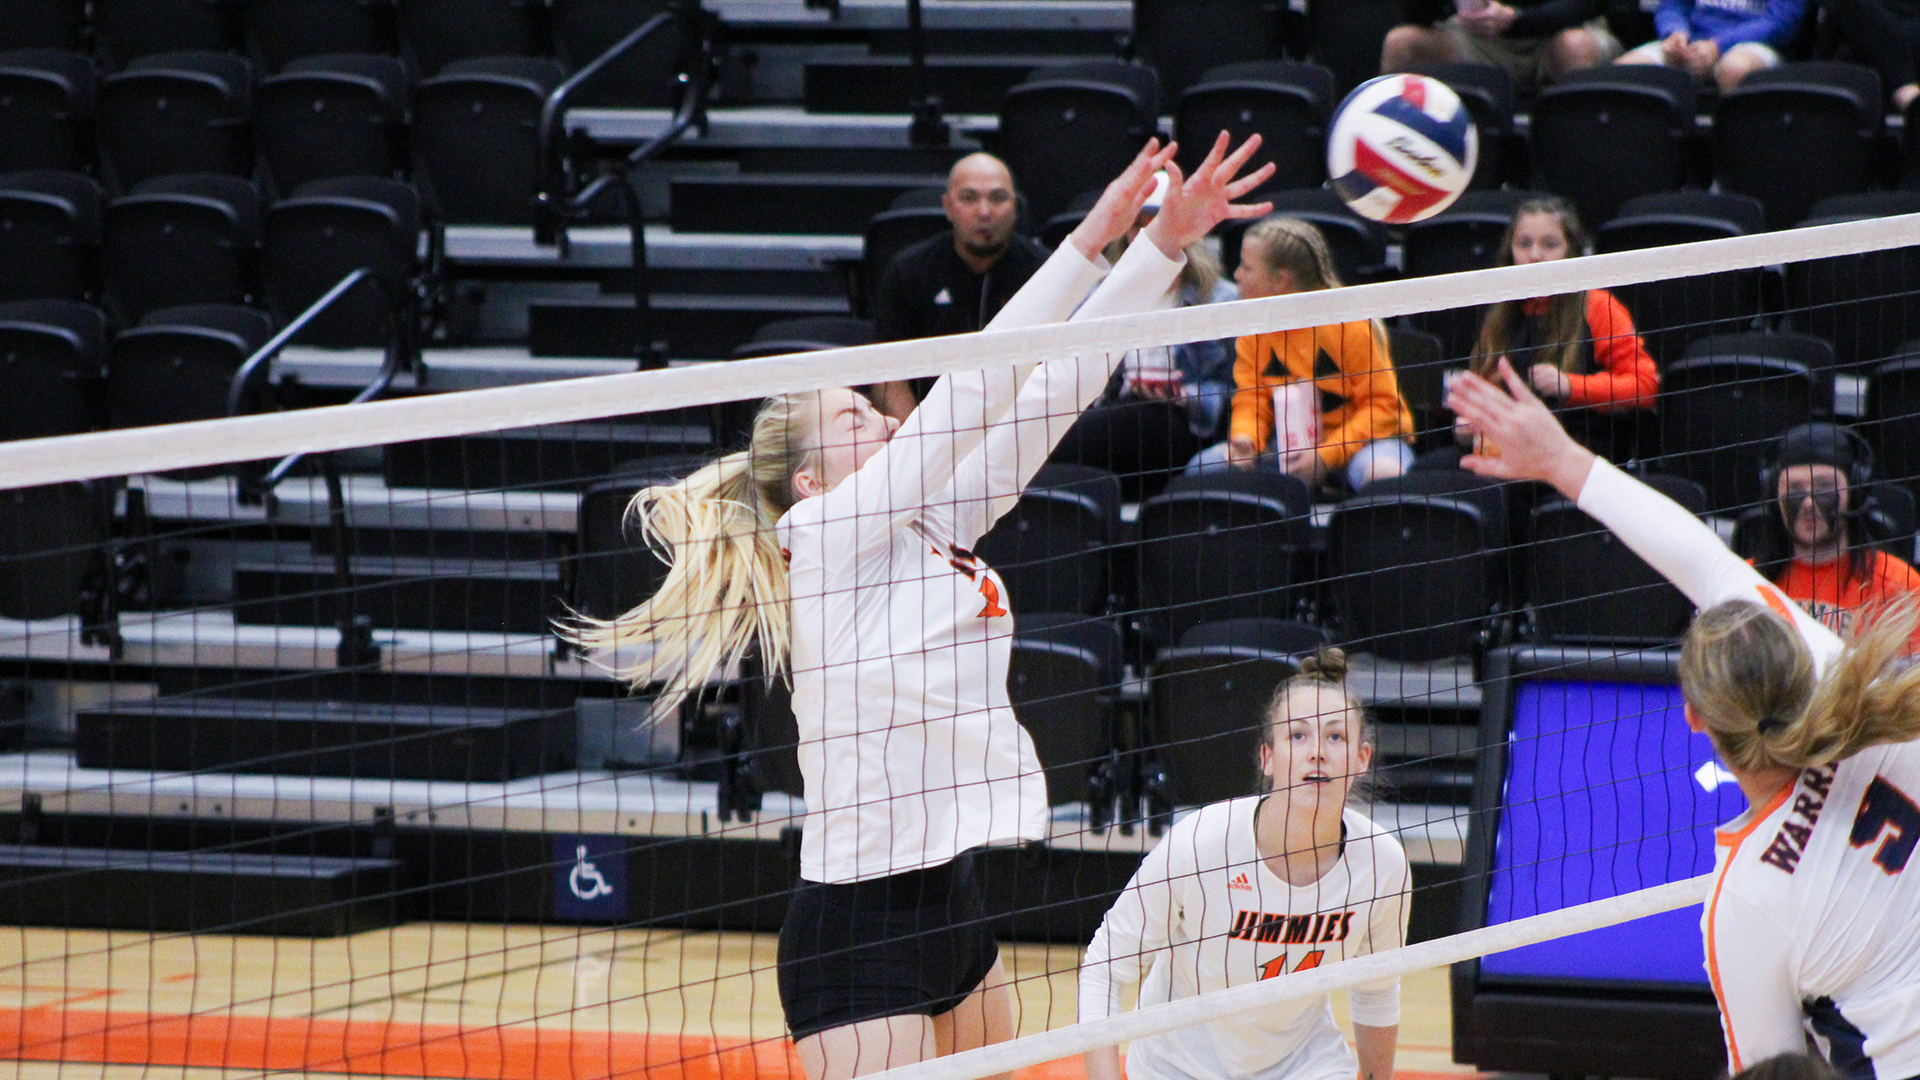 Third-ranked Midland outlasts No. 2 Jimmies in five sets